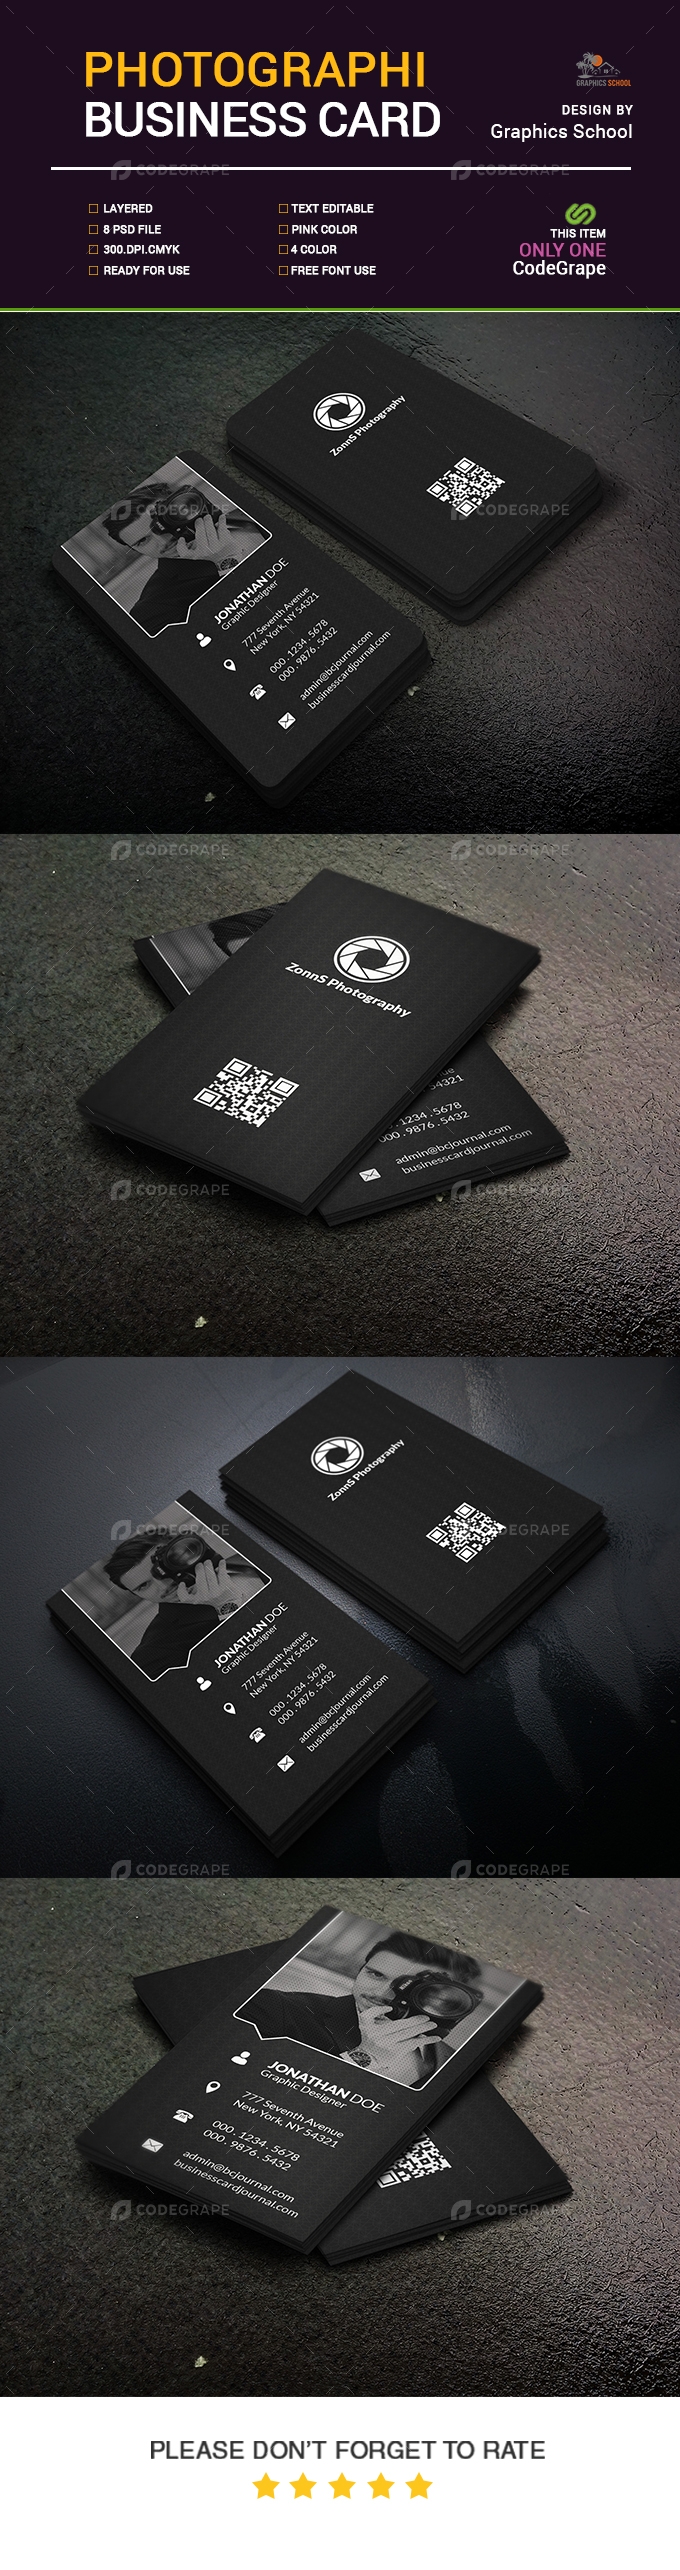 Photographic Business Card